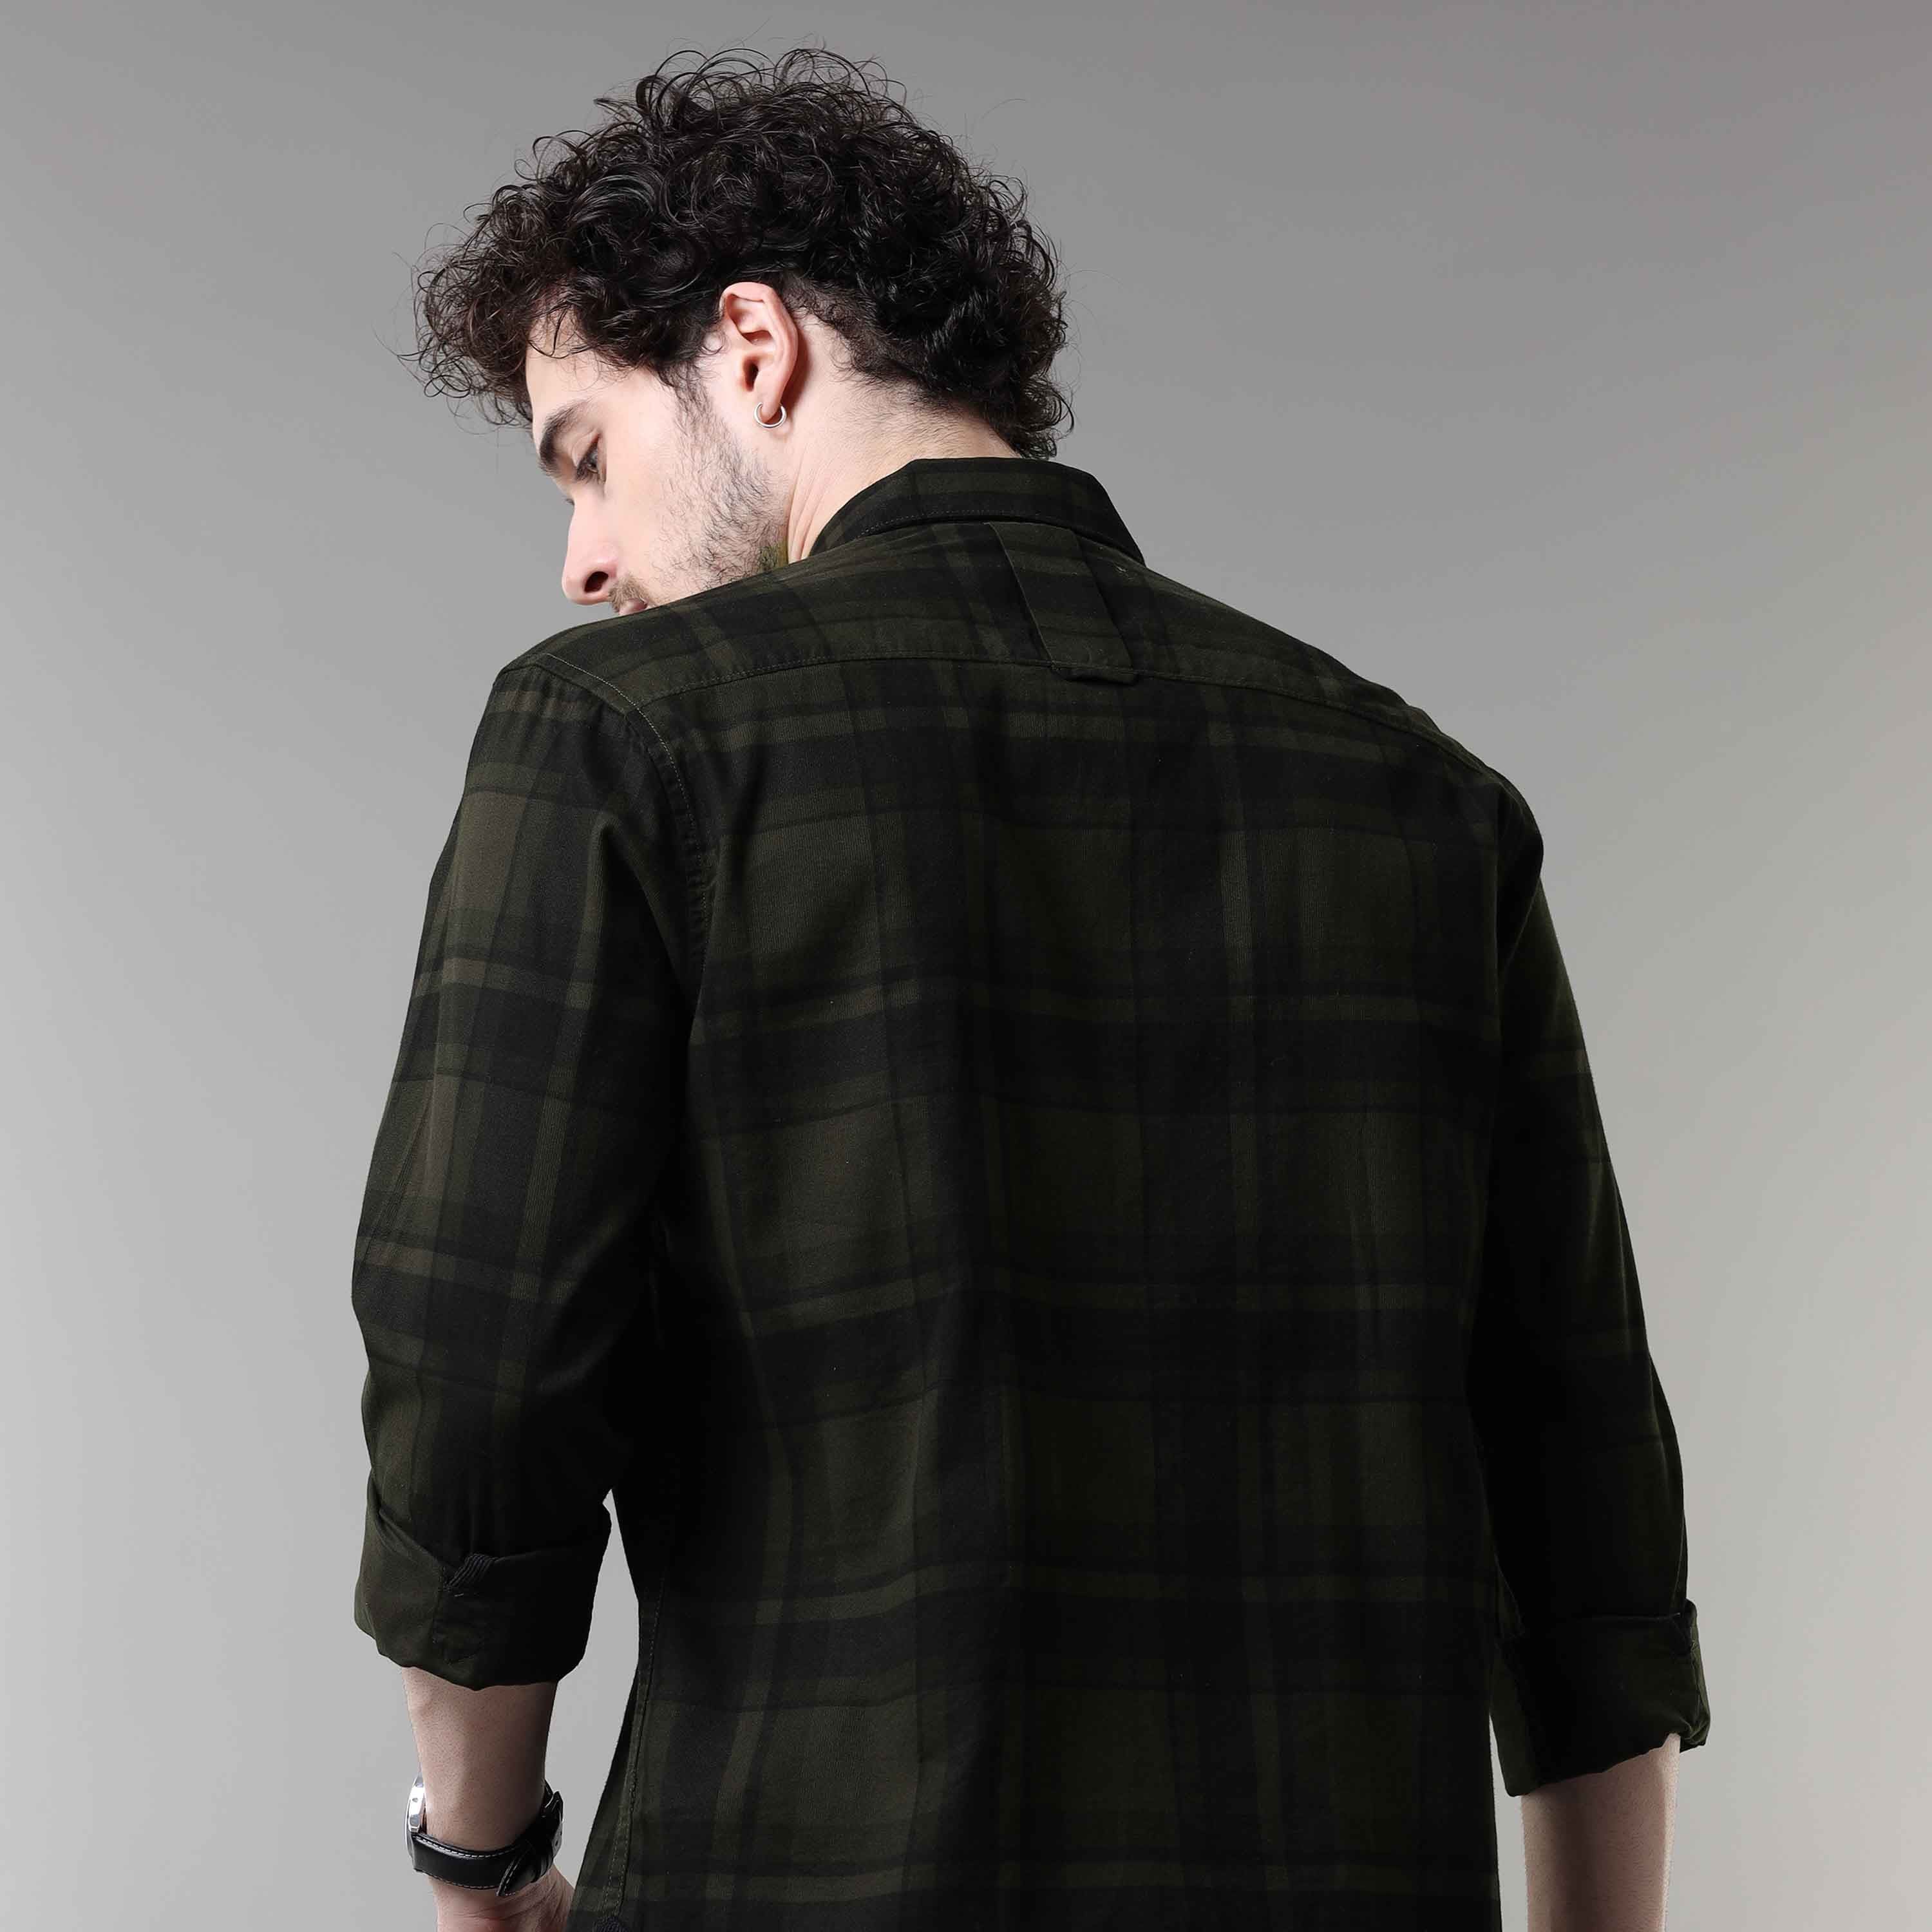 Shop Latest Green And Black Check Shirt OnlineRs. 1399.00